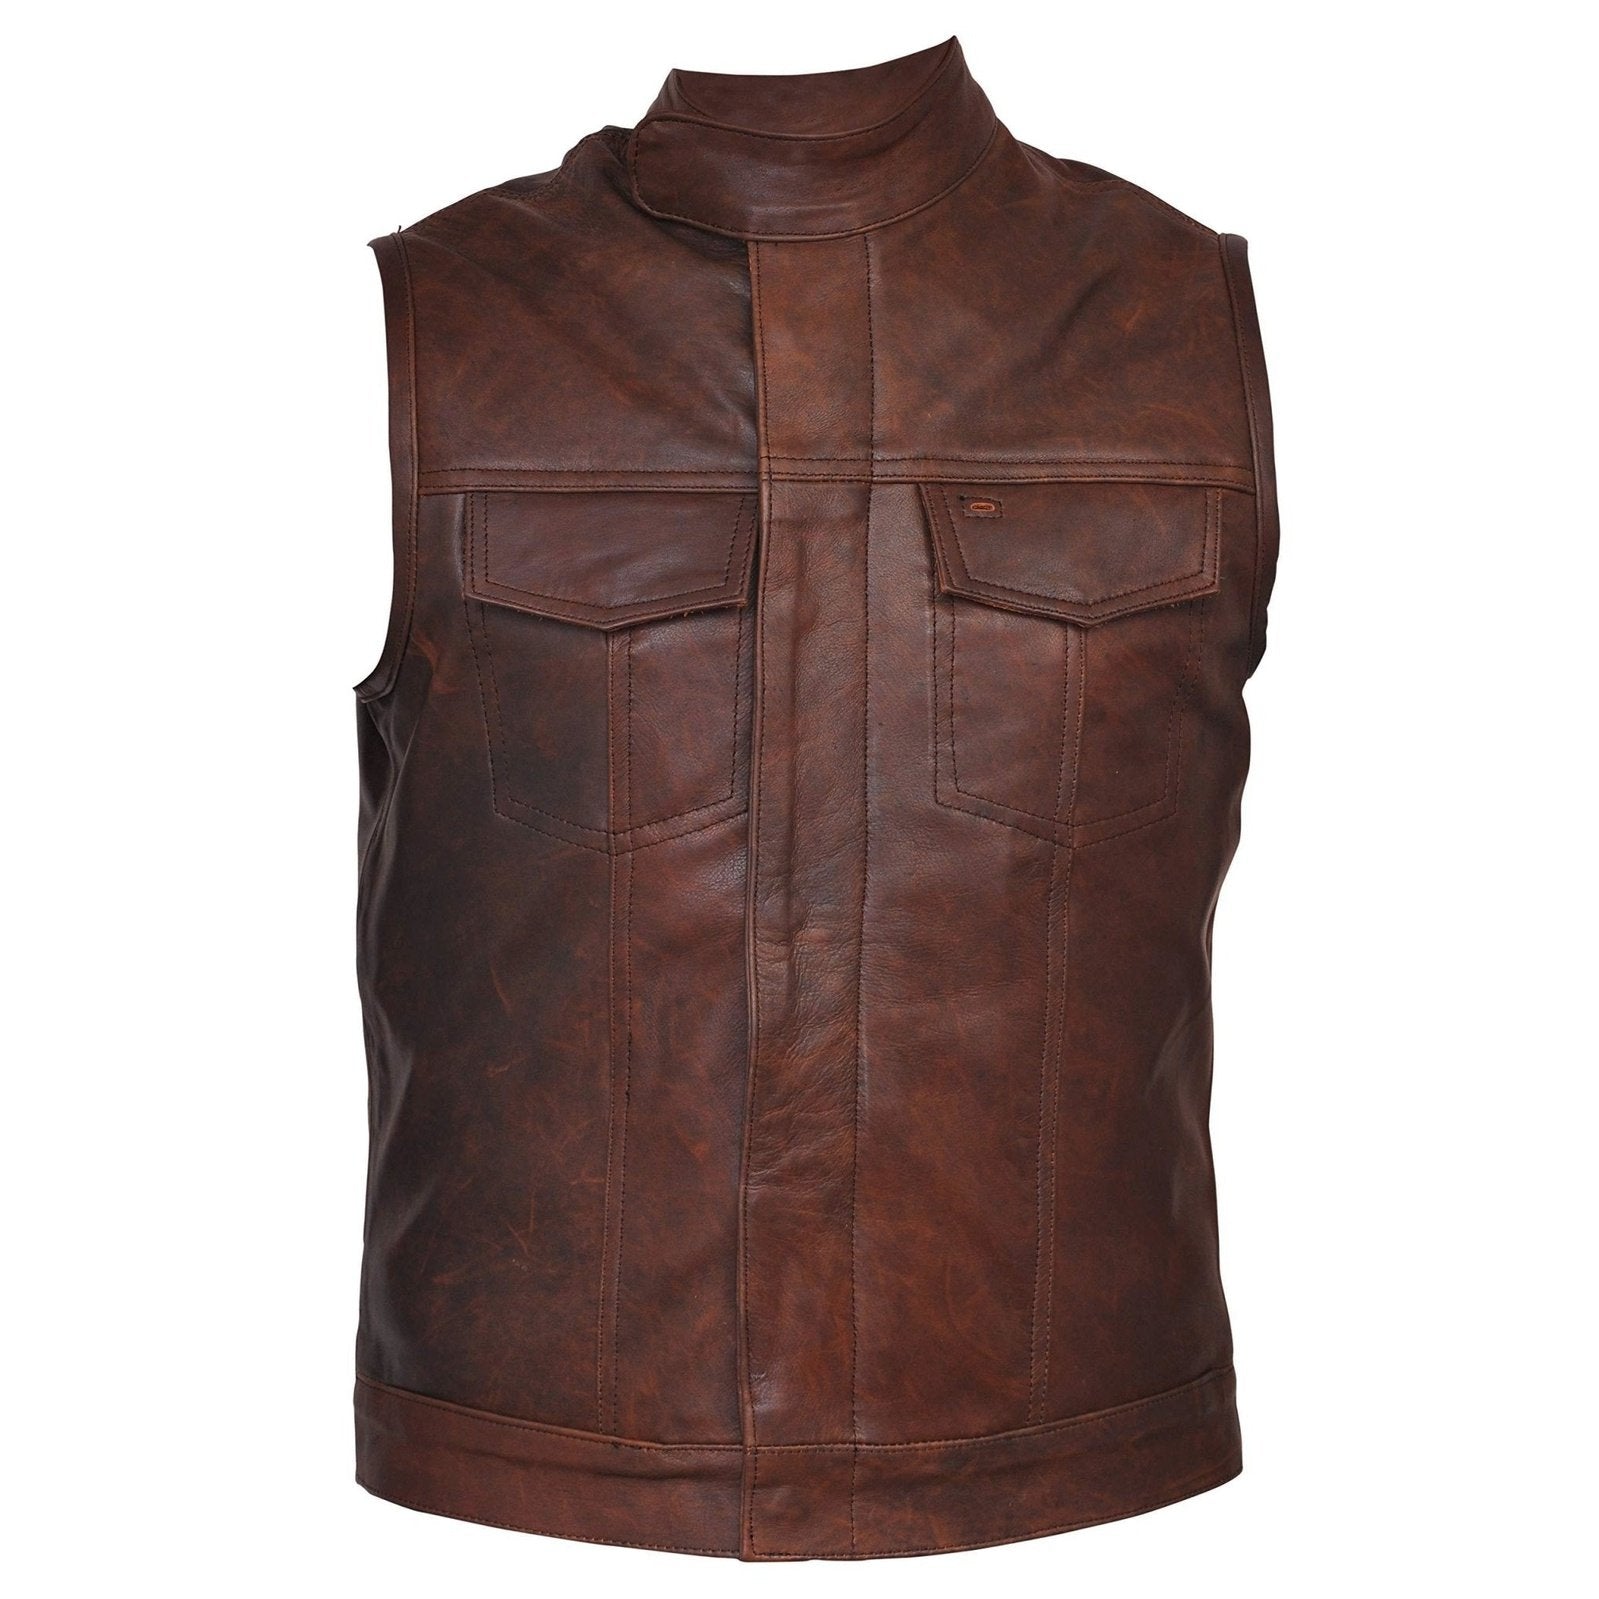 Sons Of Anarchy Style Cut Off Cowhide Leather Brown Vest Vintage Leather